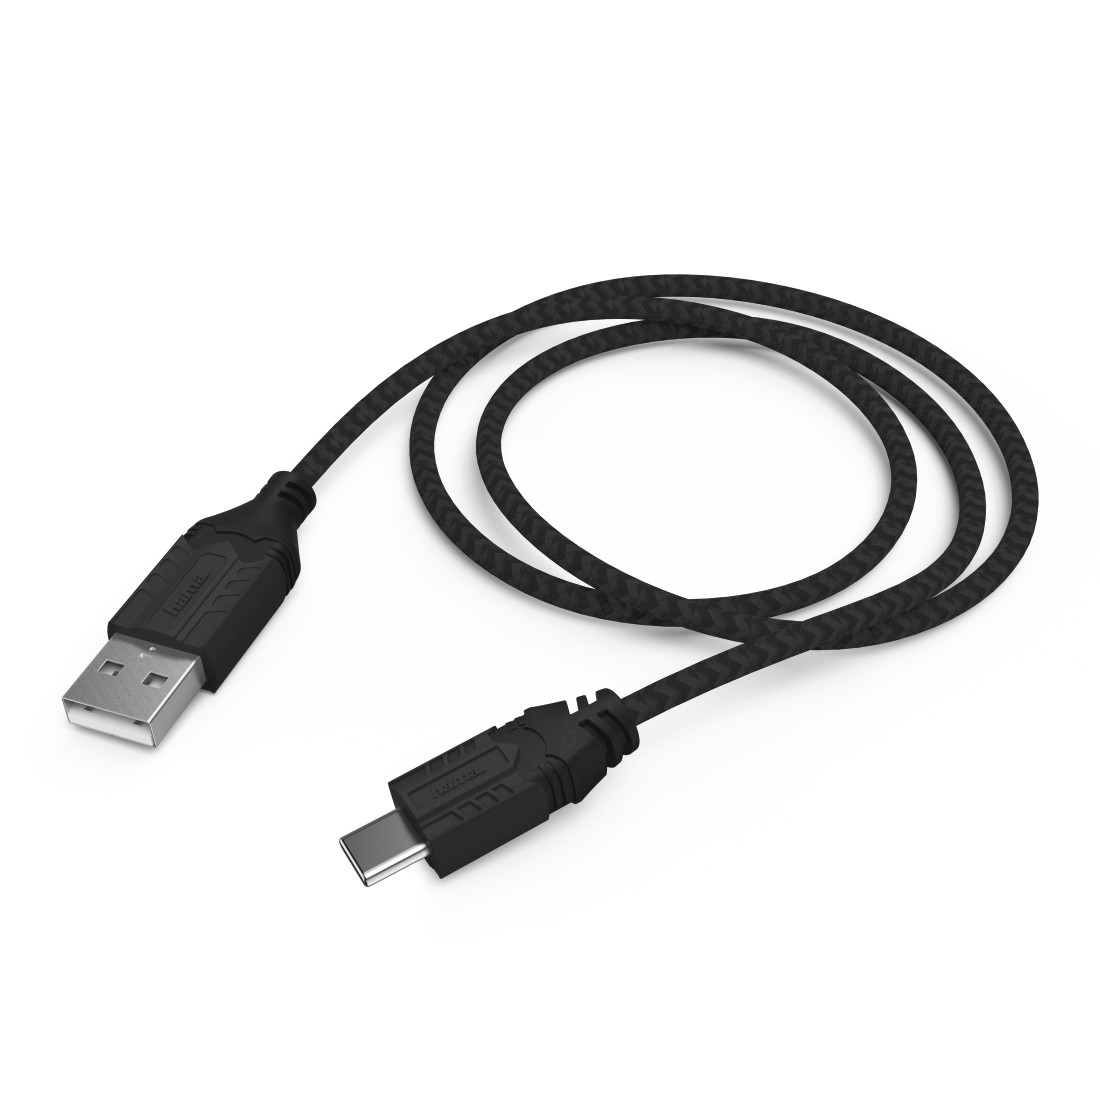 00054681 Hama Charging Cable for Nintendo Switch/Switch Lite, 2.0 m